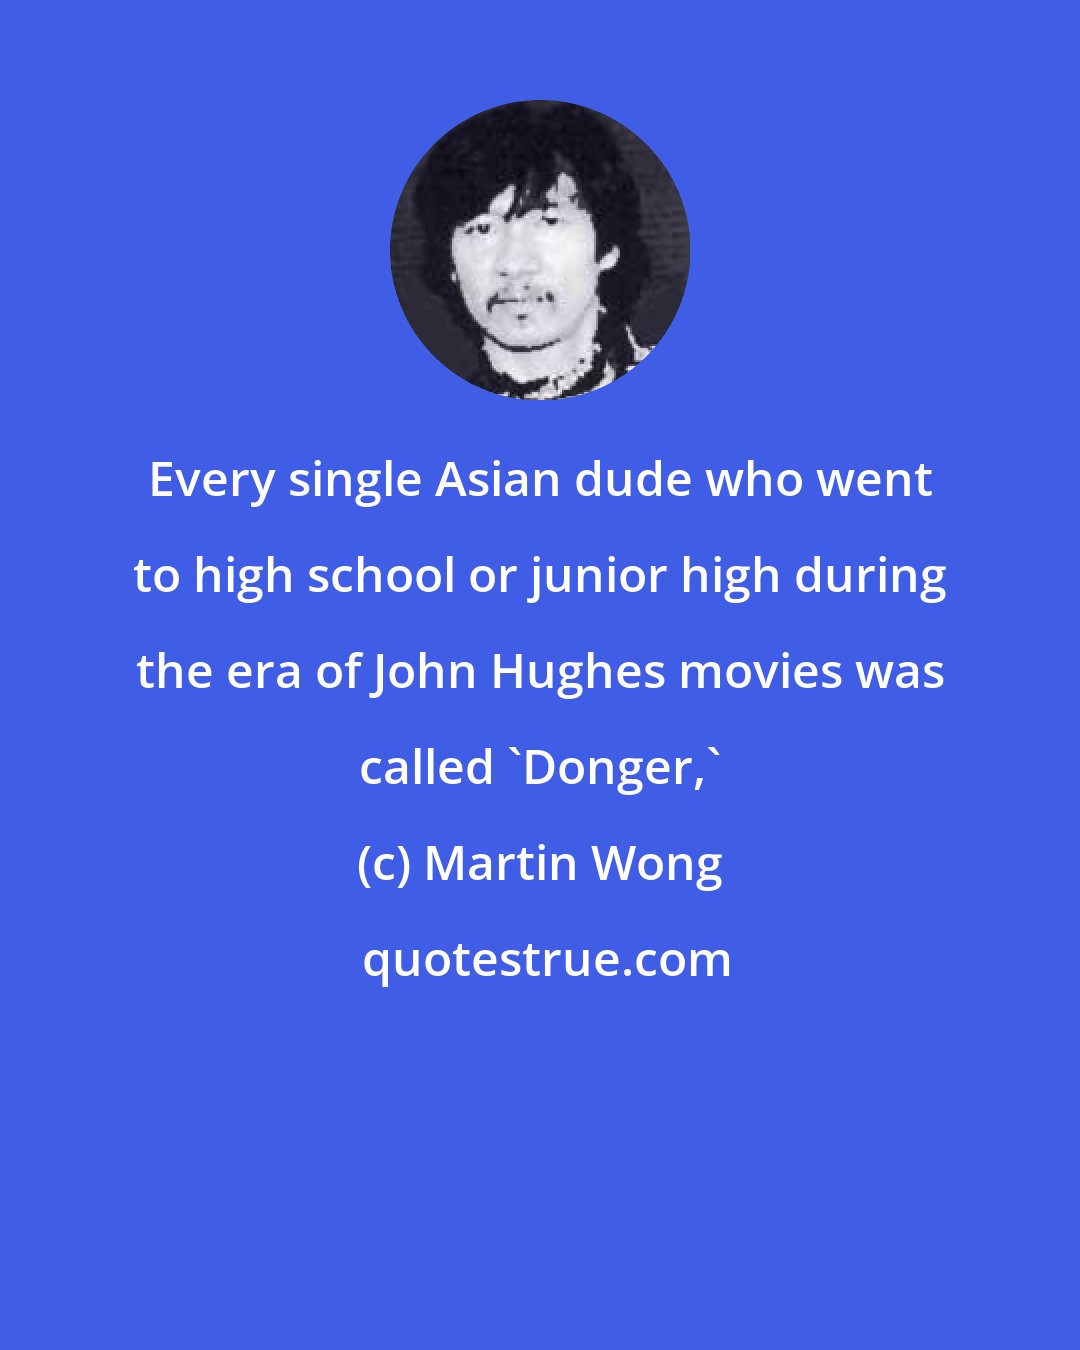 Martin Wong: Every single Asian dude who went to high school or junior high during the era of John Hughes movies was called 'Donger,'